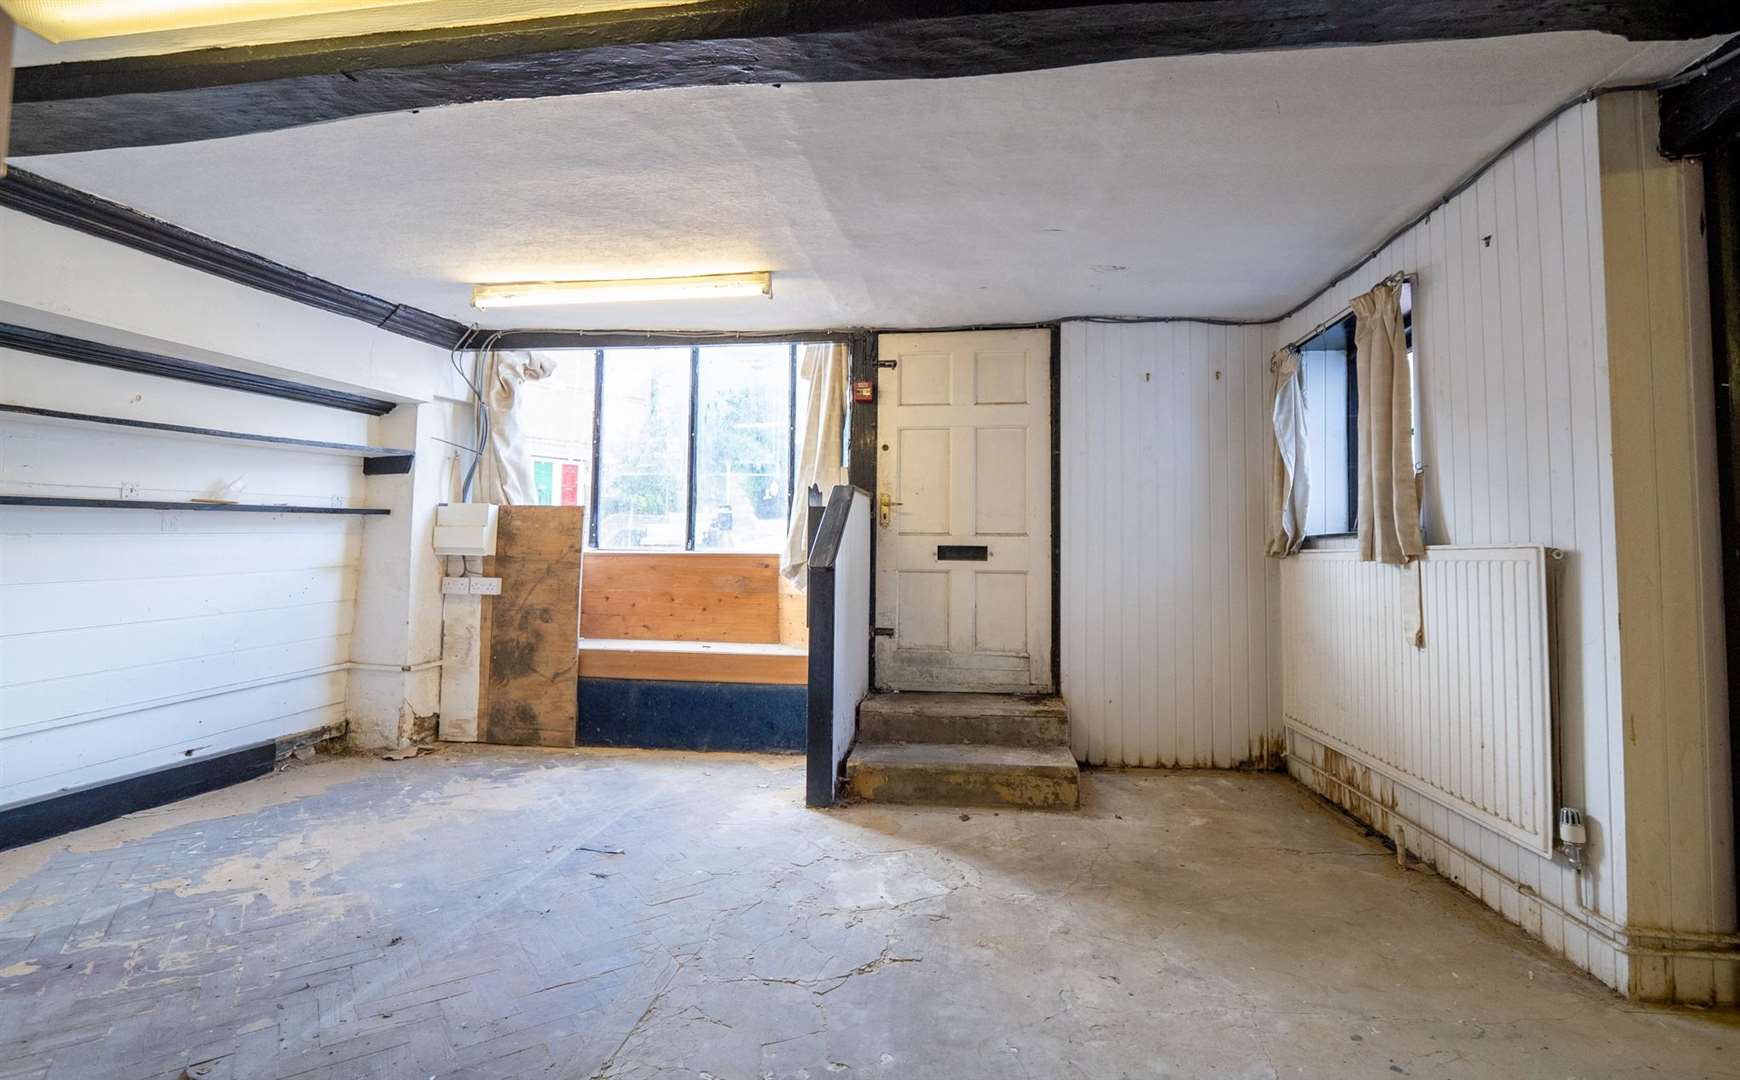 Inside the property which has been empty for 10 years